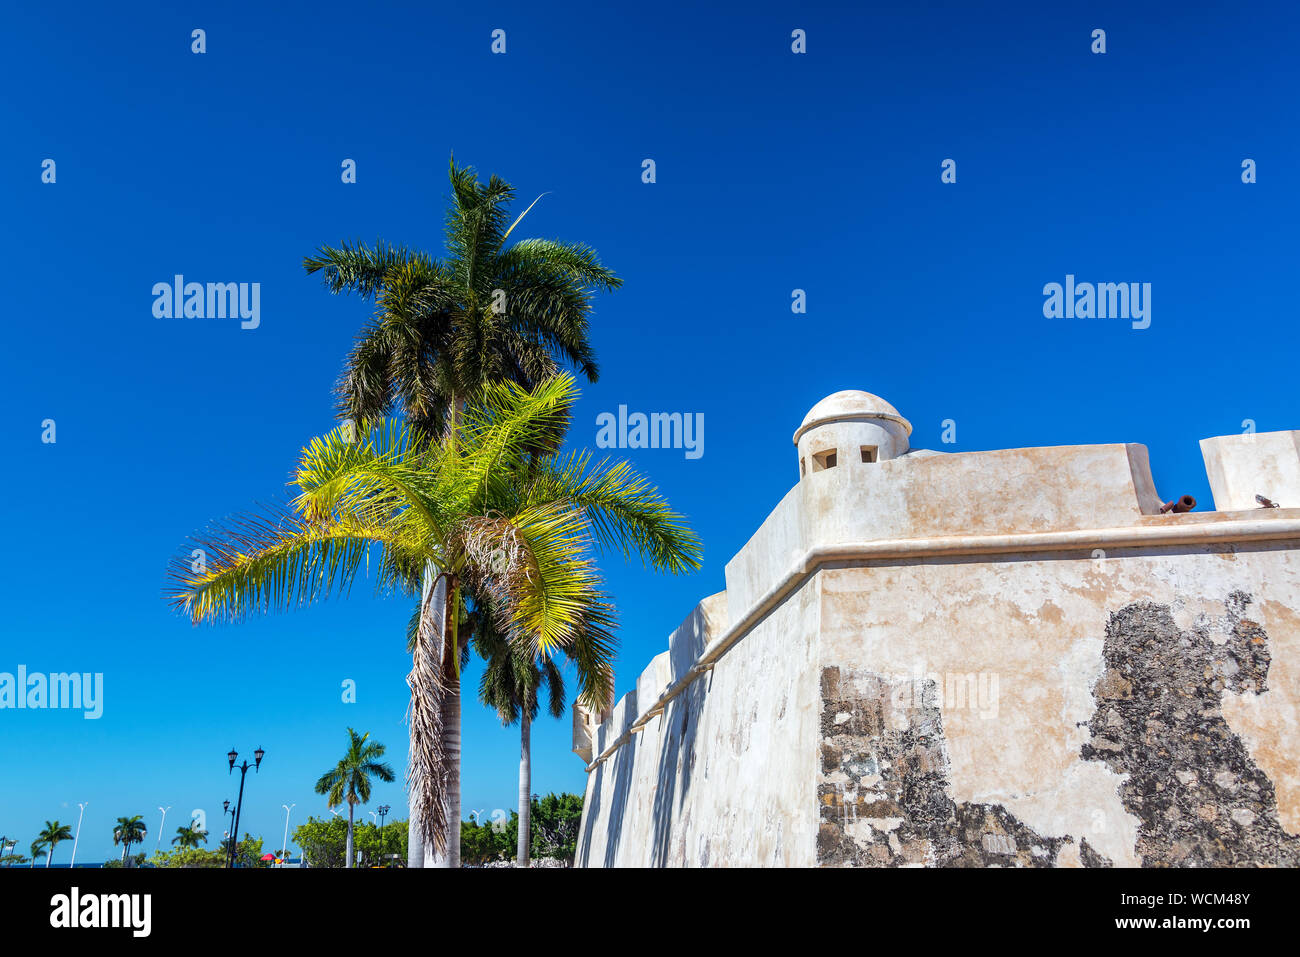 Low Angle View Of Colonial Defensive Wall By Palm Tree Against Clear Blue Sky During Sunny Day Stock Photo